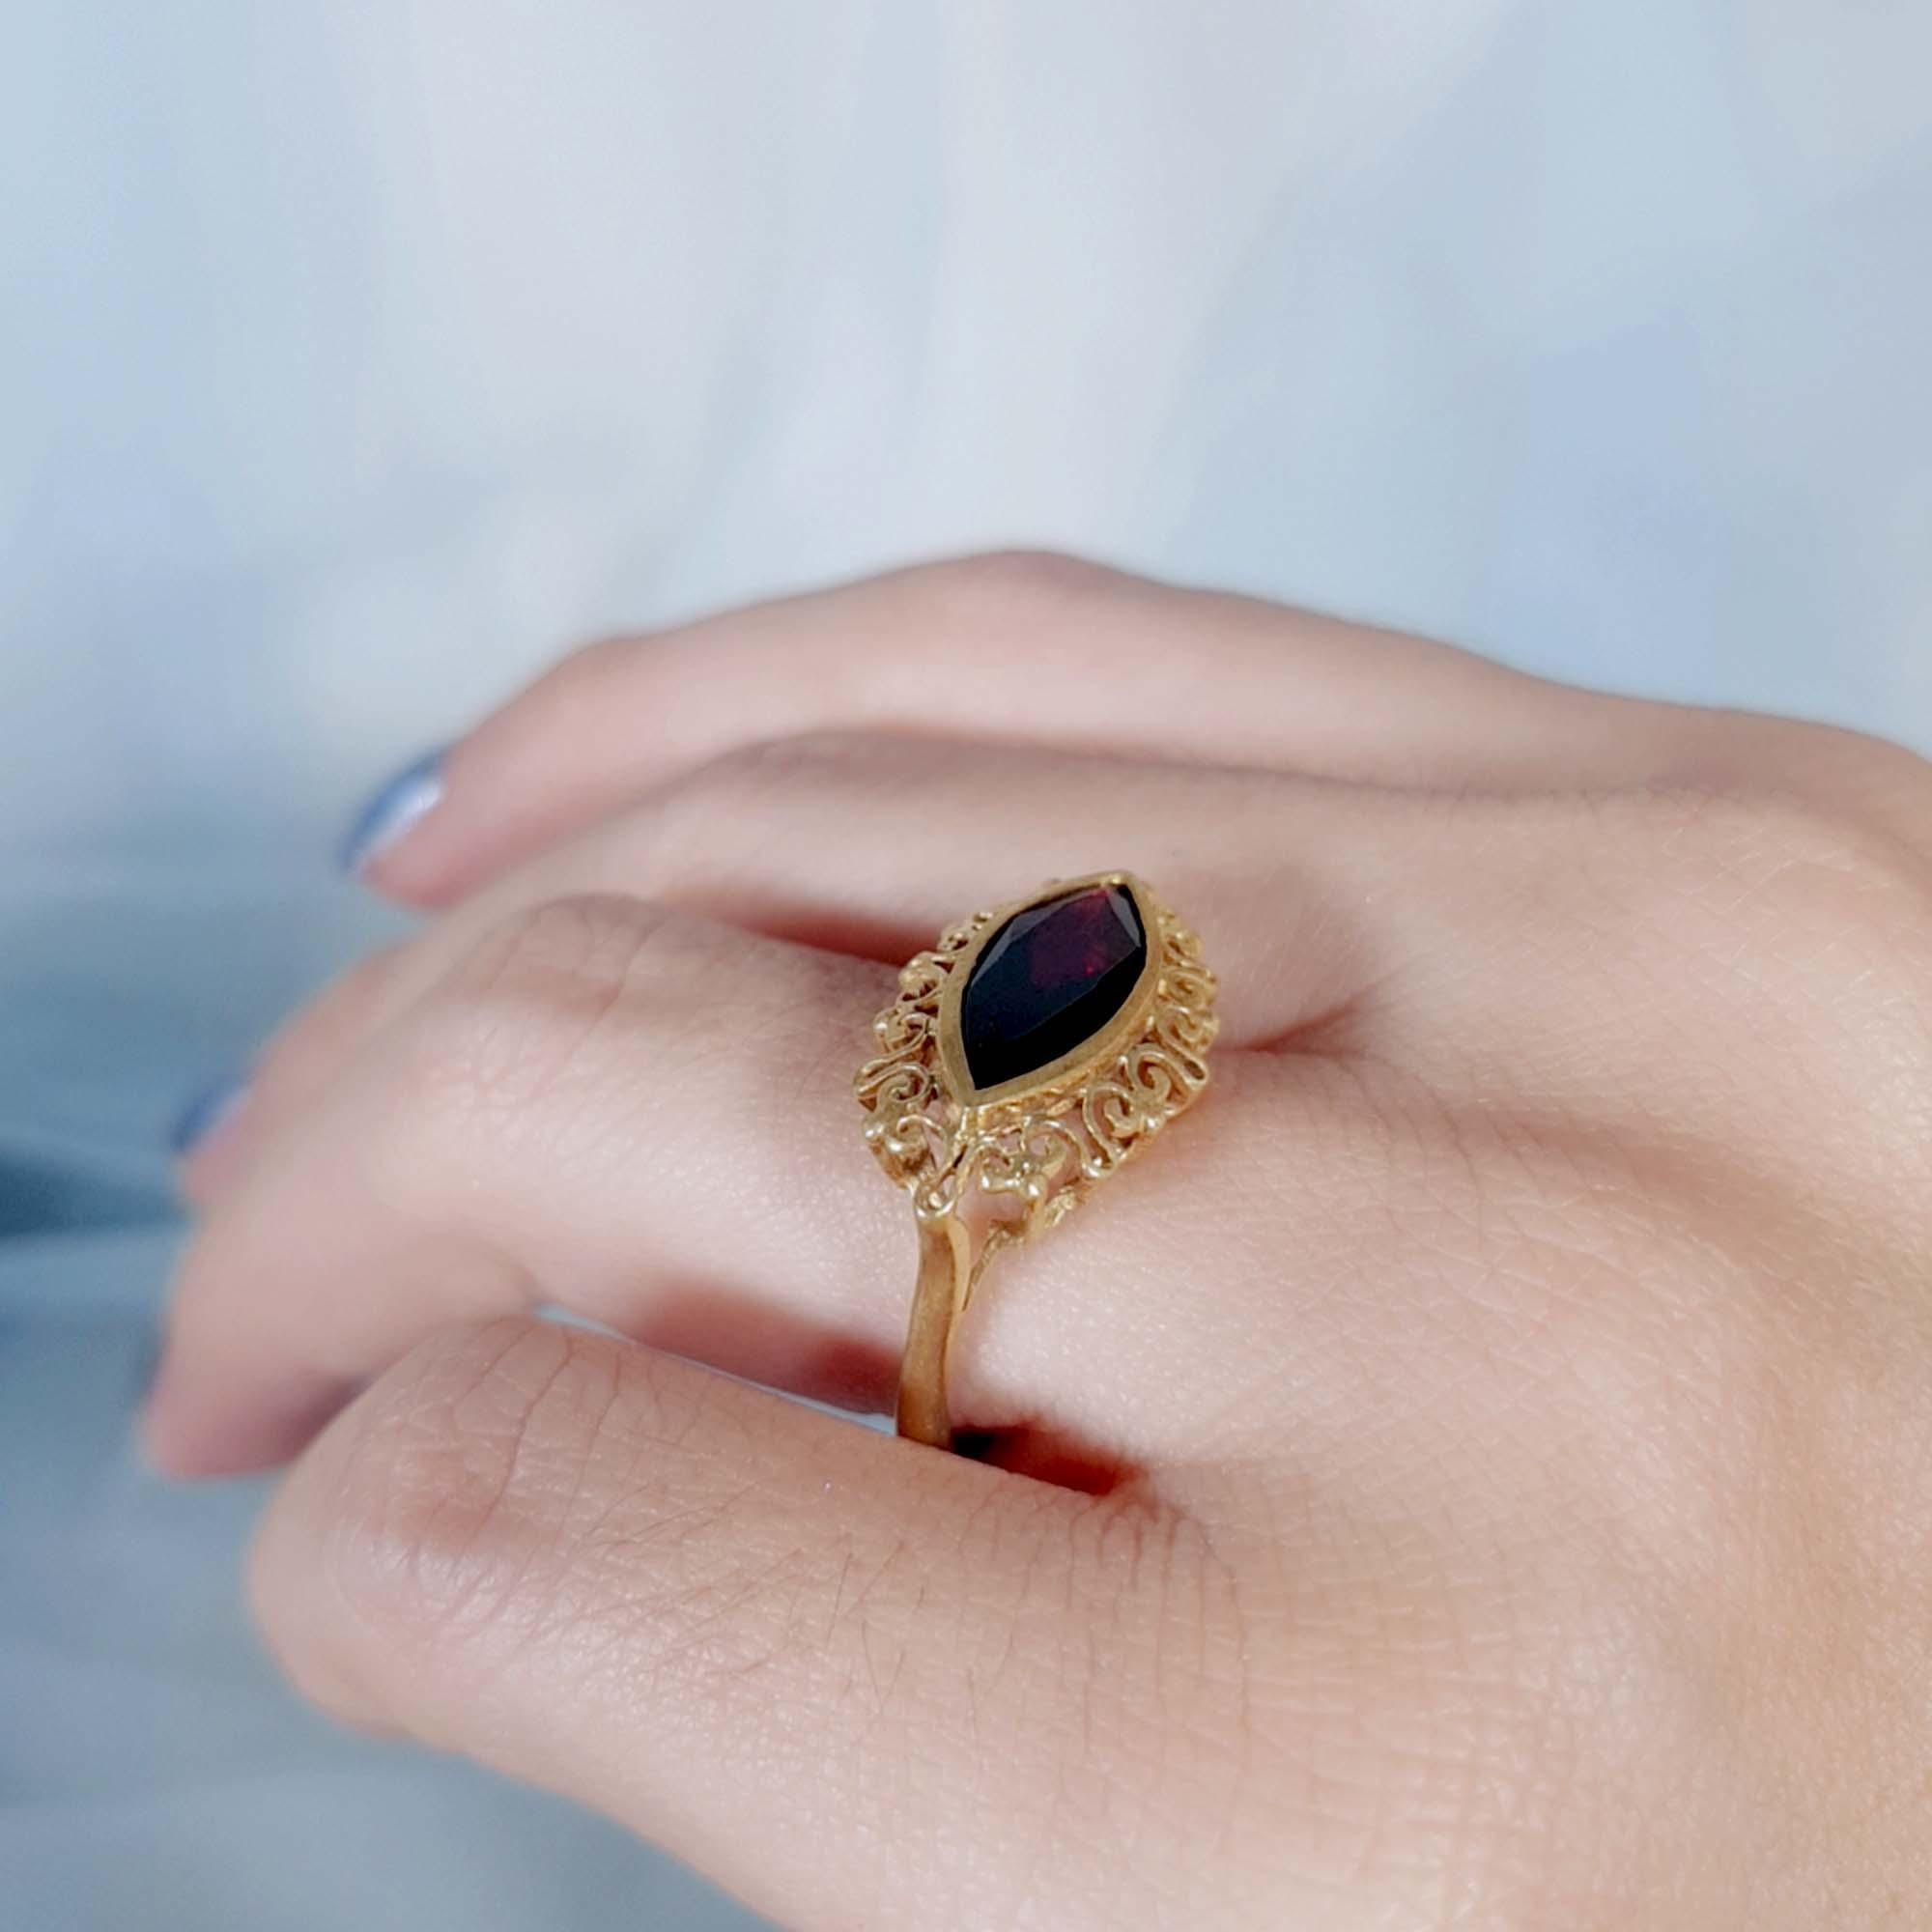 For Sale:  Natural Marquise Garnet Vintage Style Eye Ring in Solid 9K Yellow Gold 10